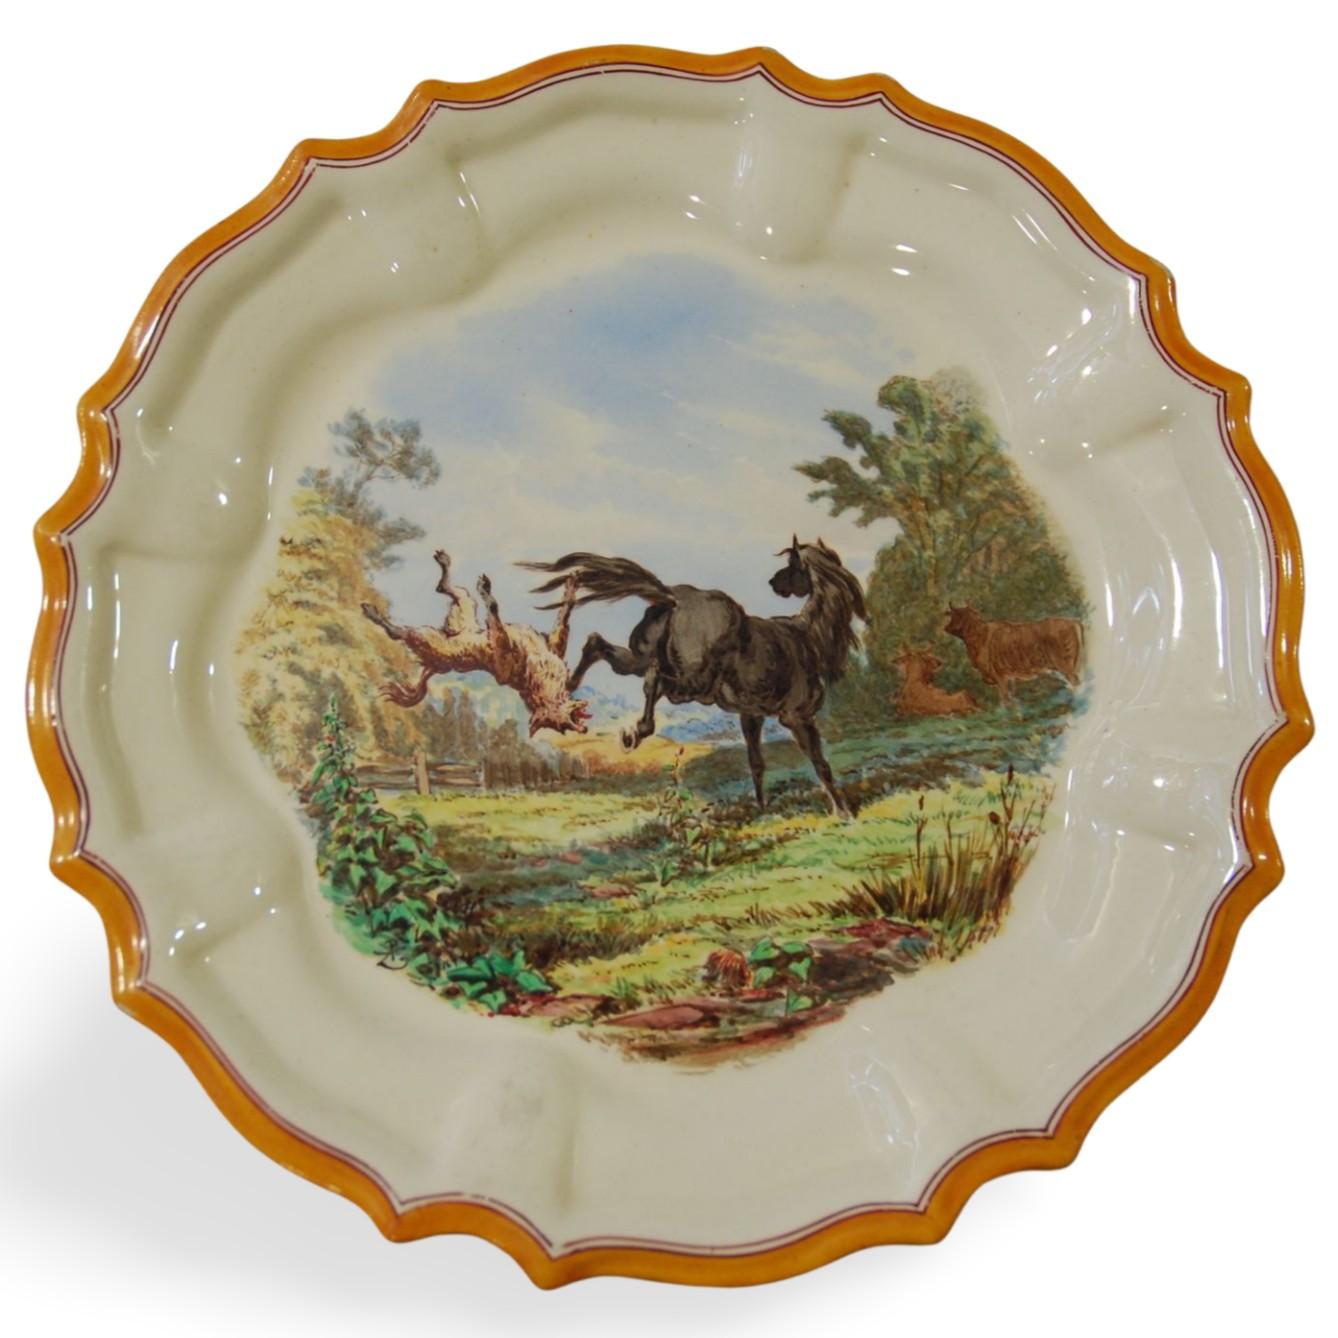 Romantic Set of 12 Plates, Aesop Fables, Wedgwood, circa 1860 For Sale